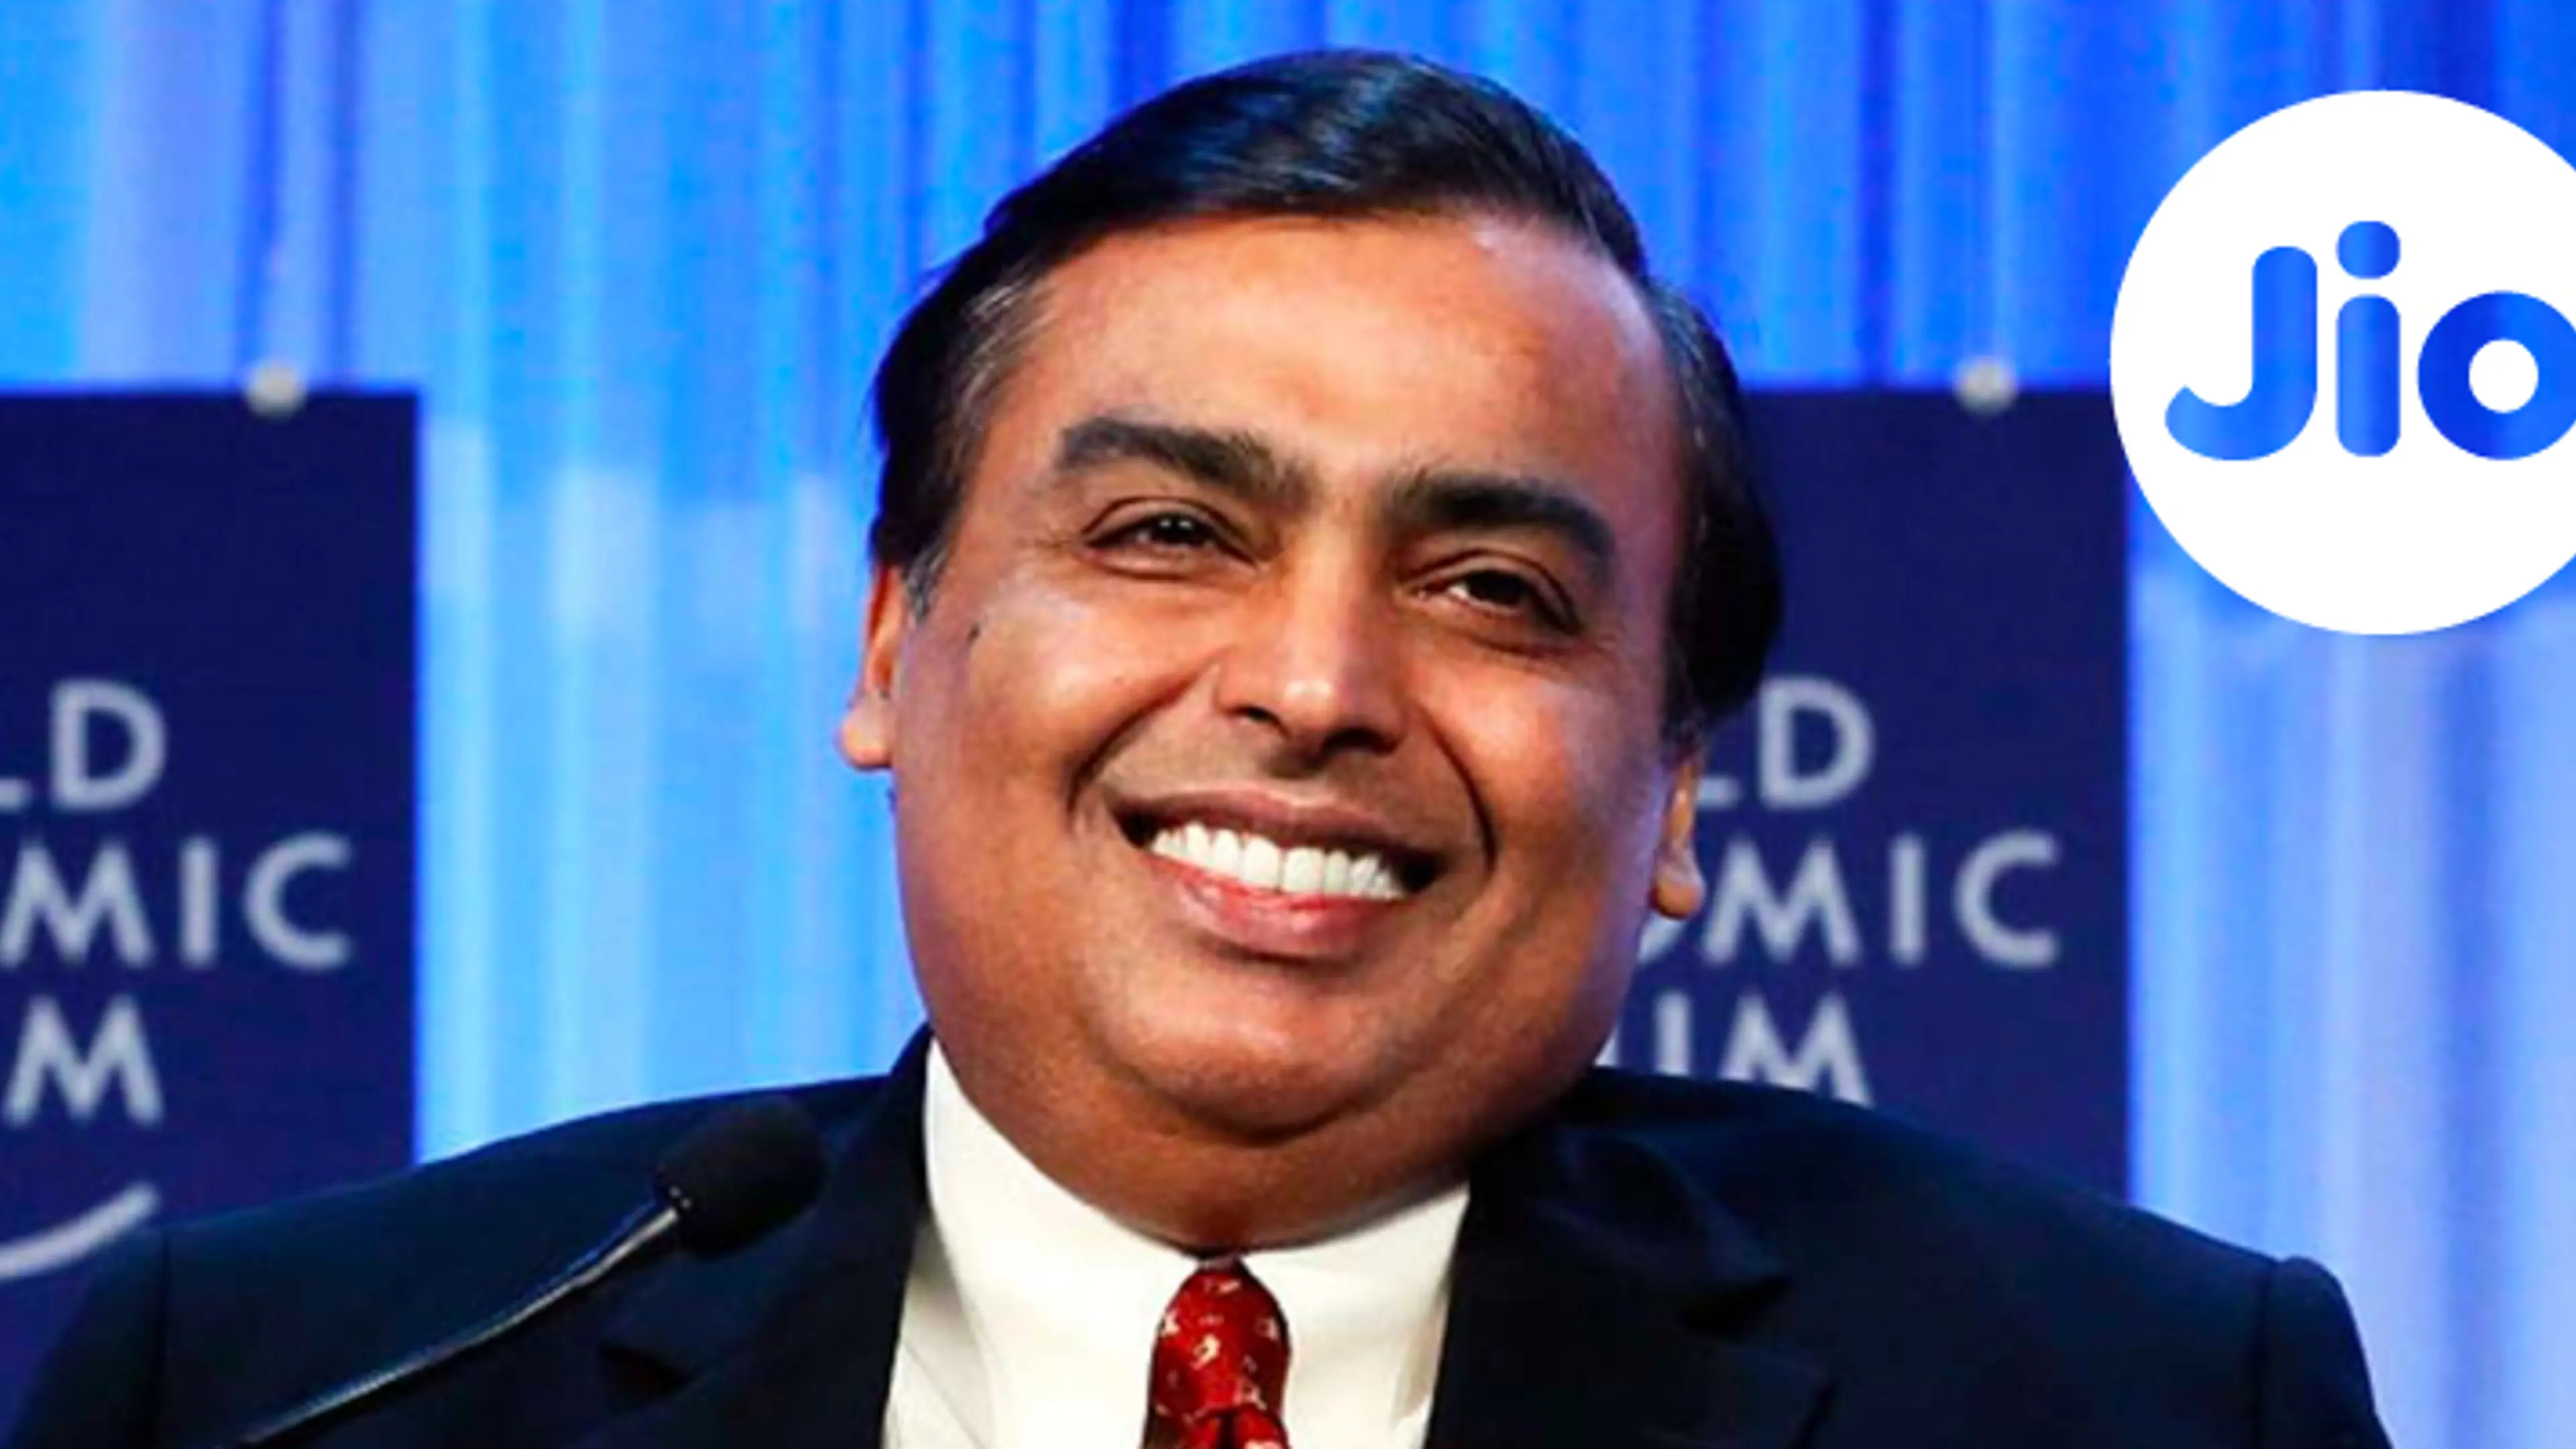 Mukesh Ambani's Reliance is developing JioBook, a low-cost 4G-enabled laptop